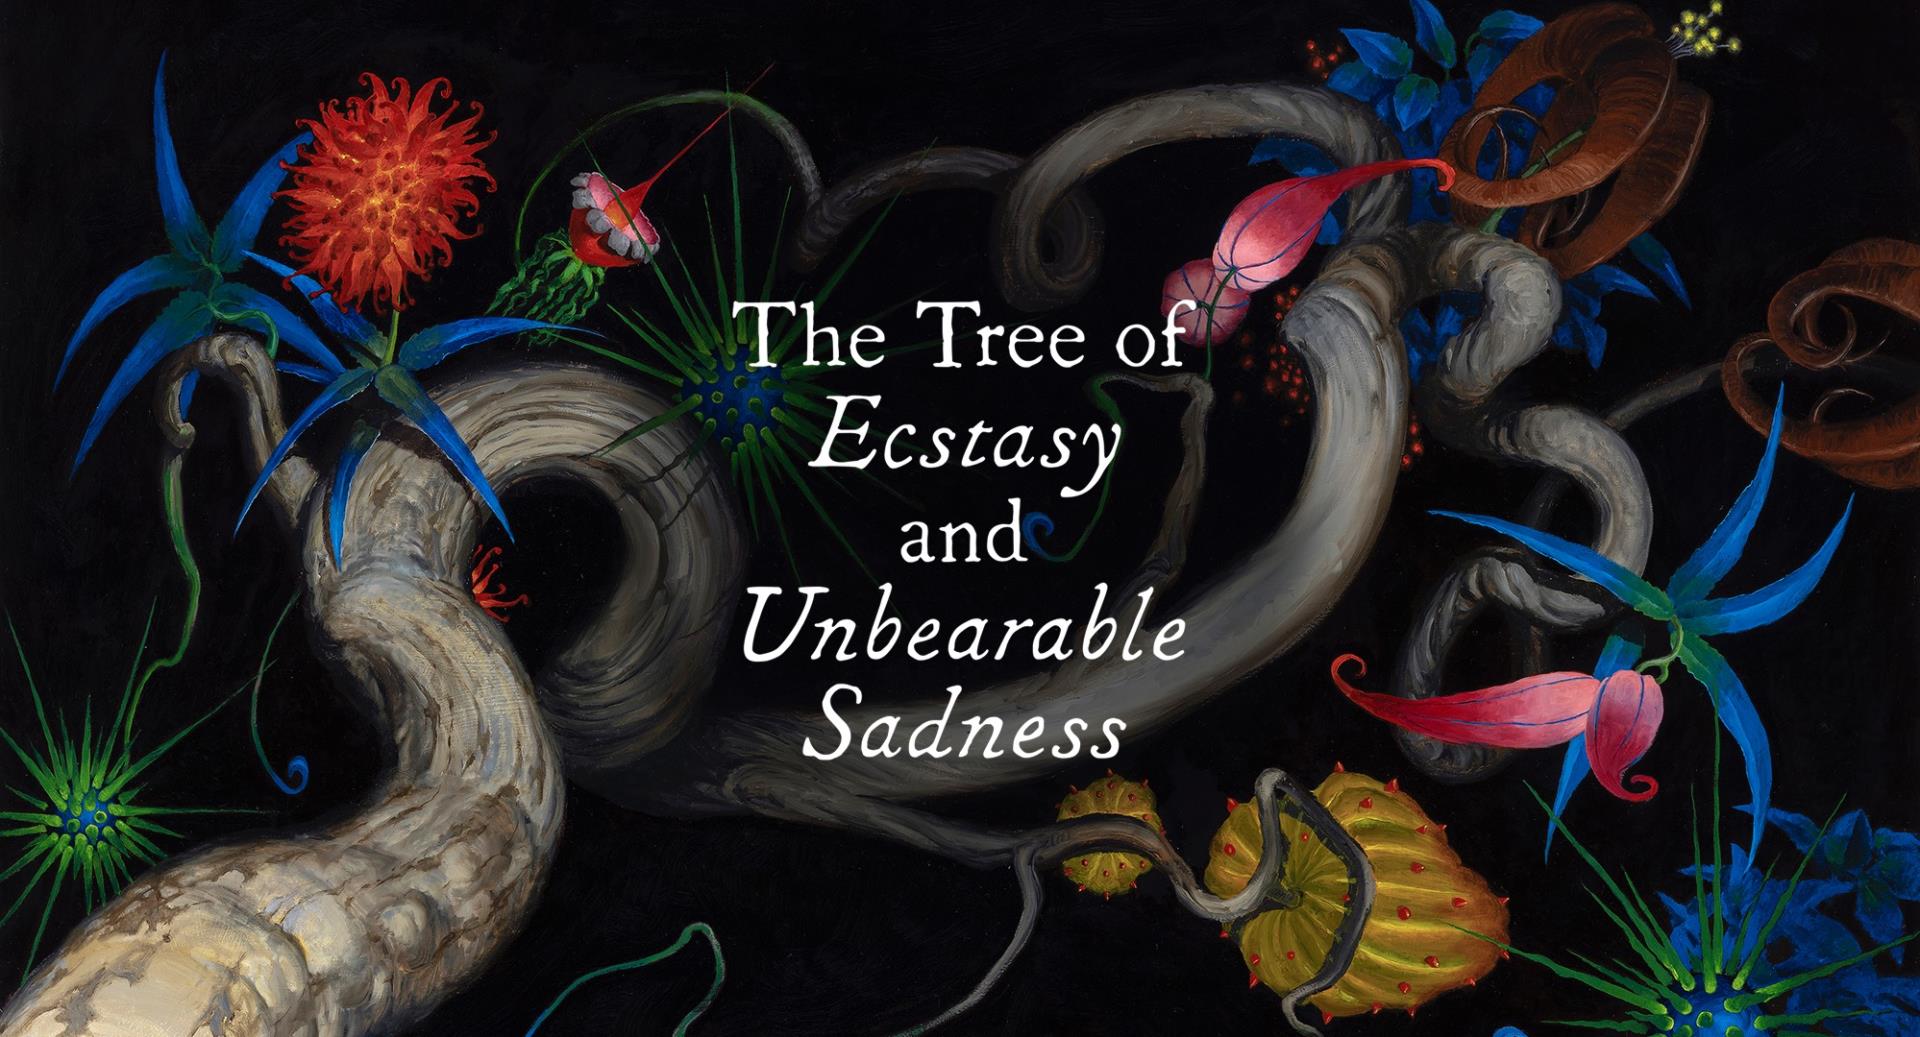 Free Screening of The Tree of Ecstasy and Unbearable Sadness